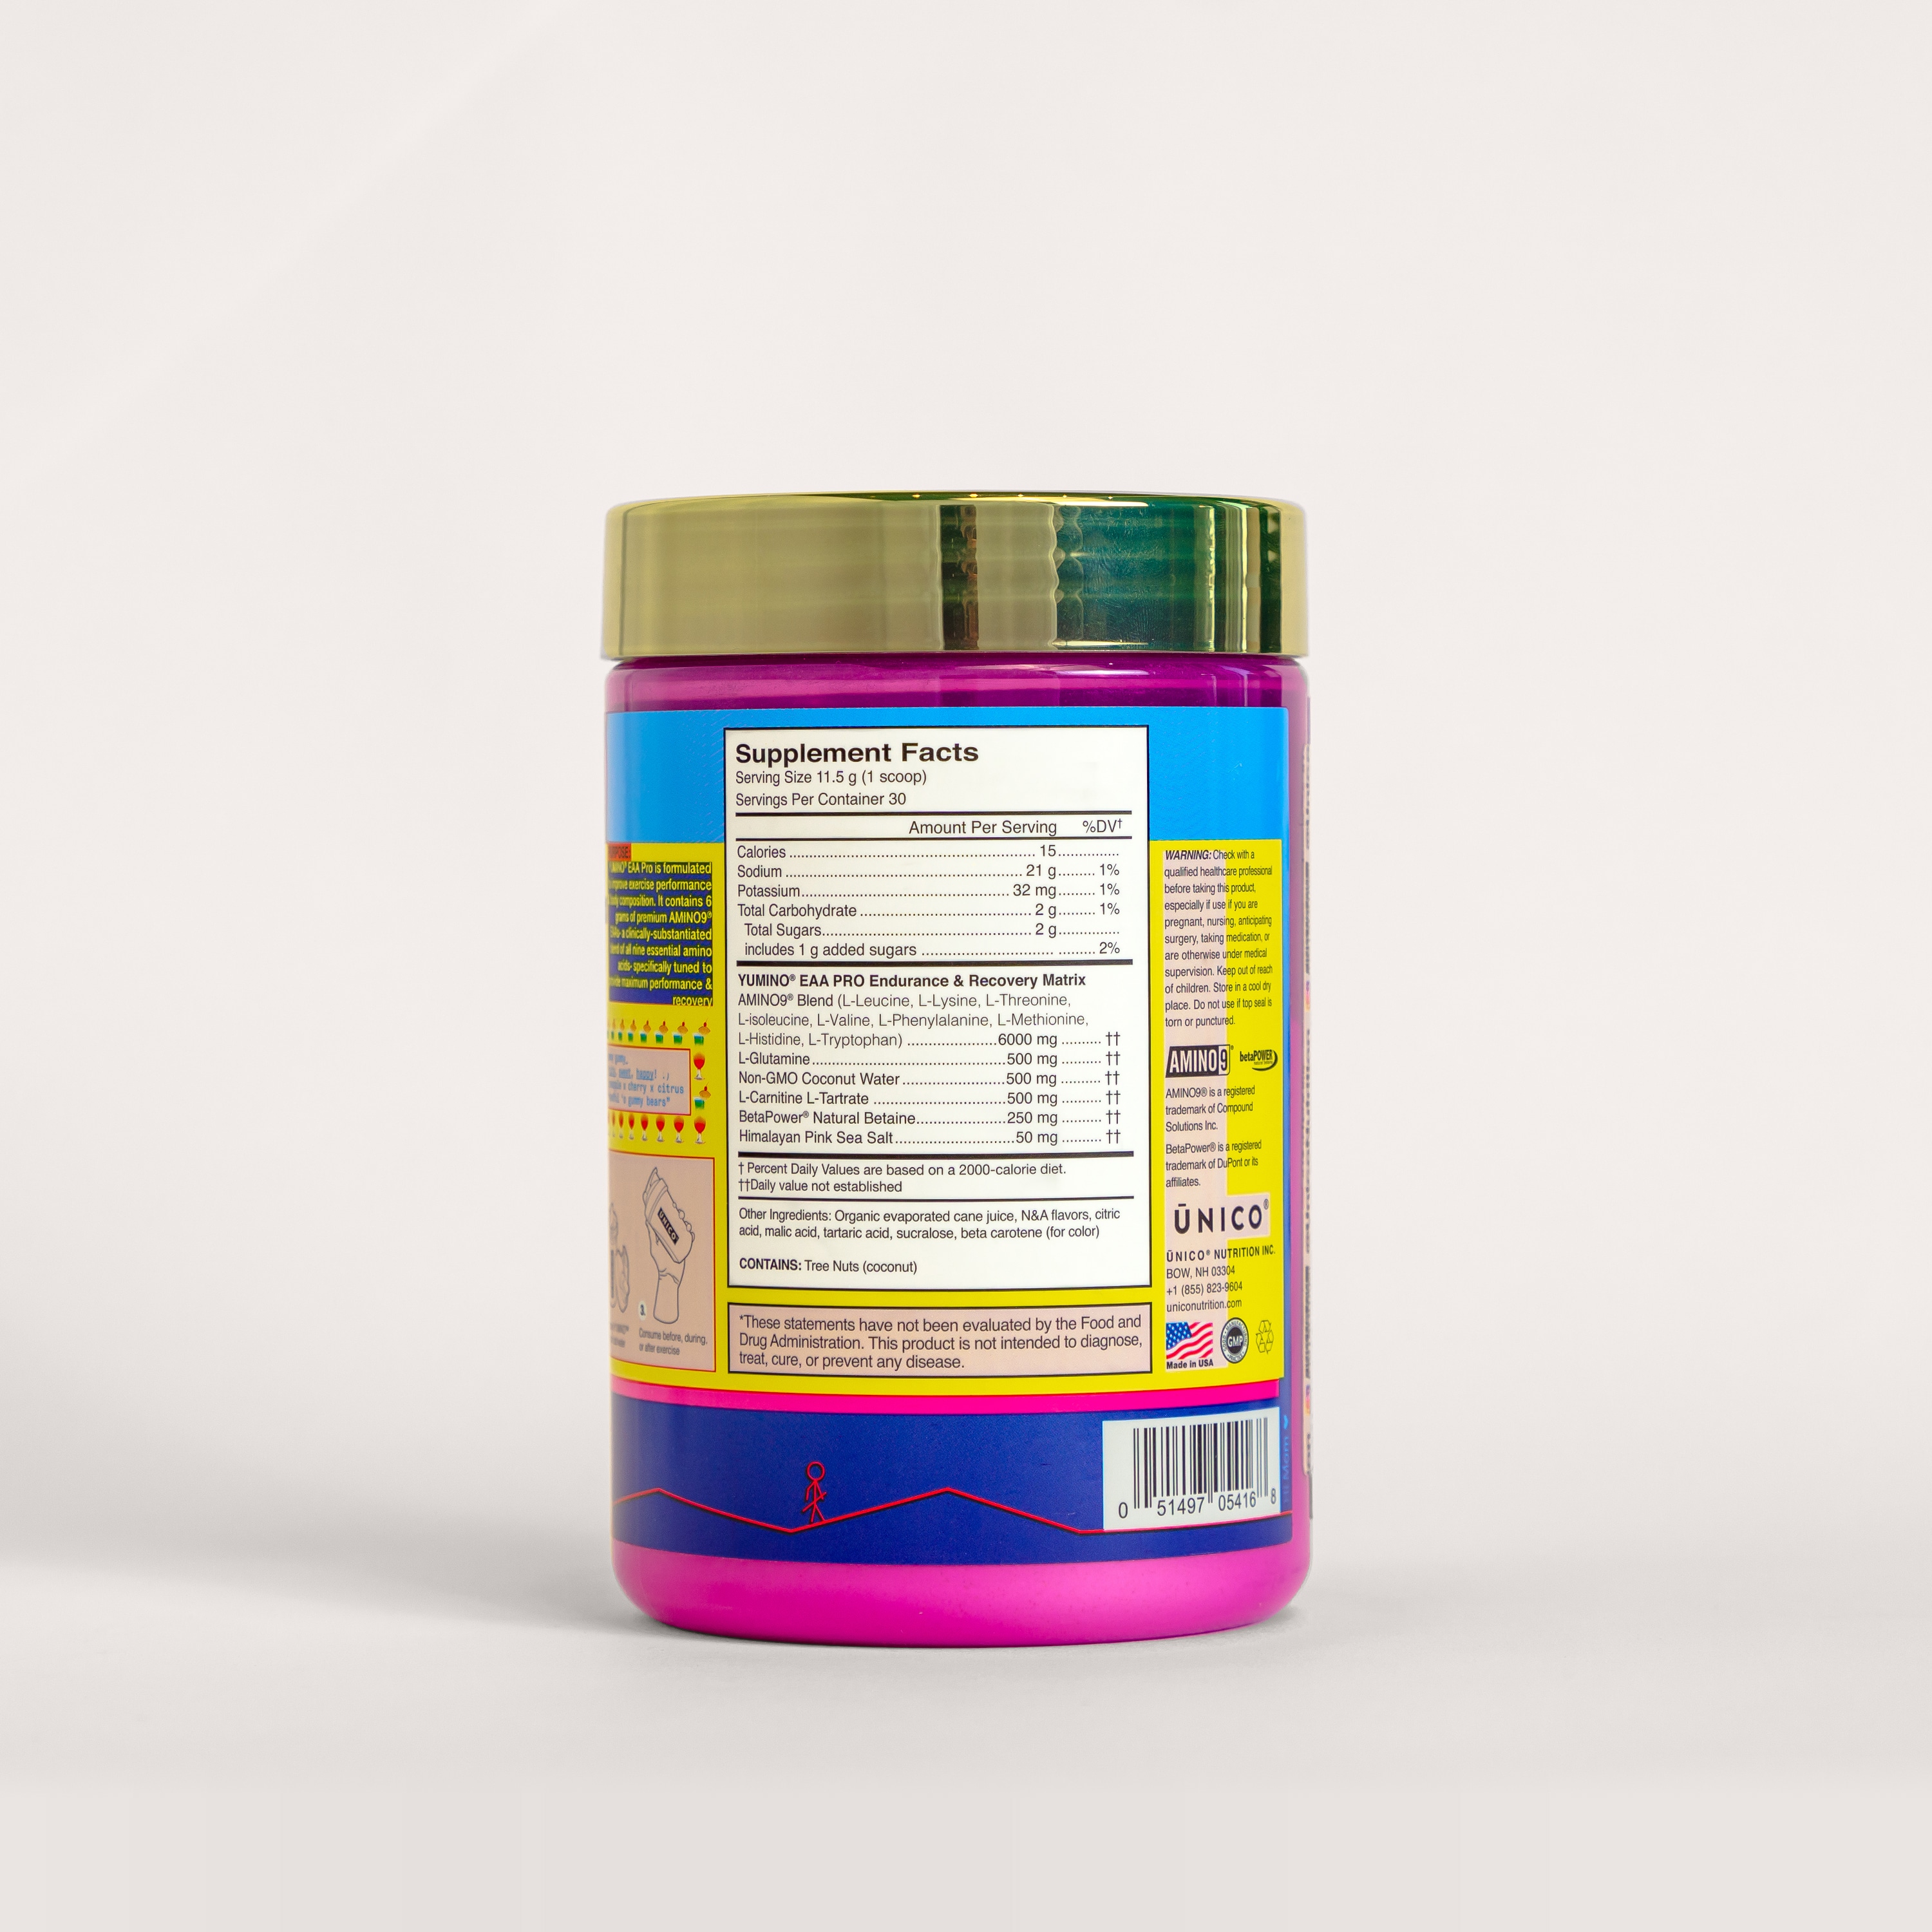 yumino essential amino acid blend back view of nutrition facts amino9 blend is featured ingredient